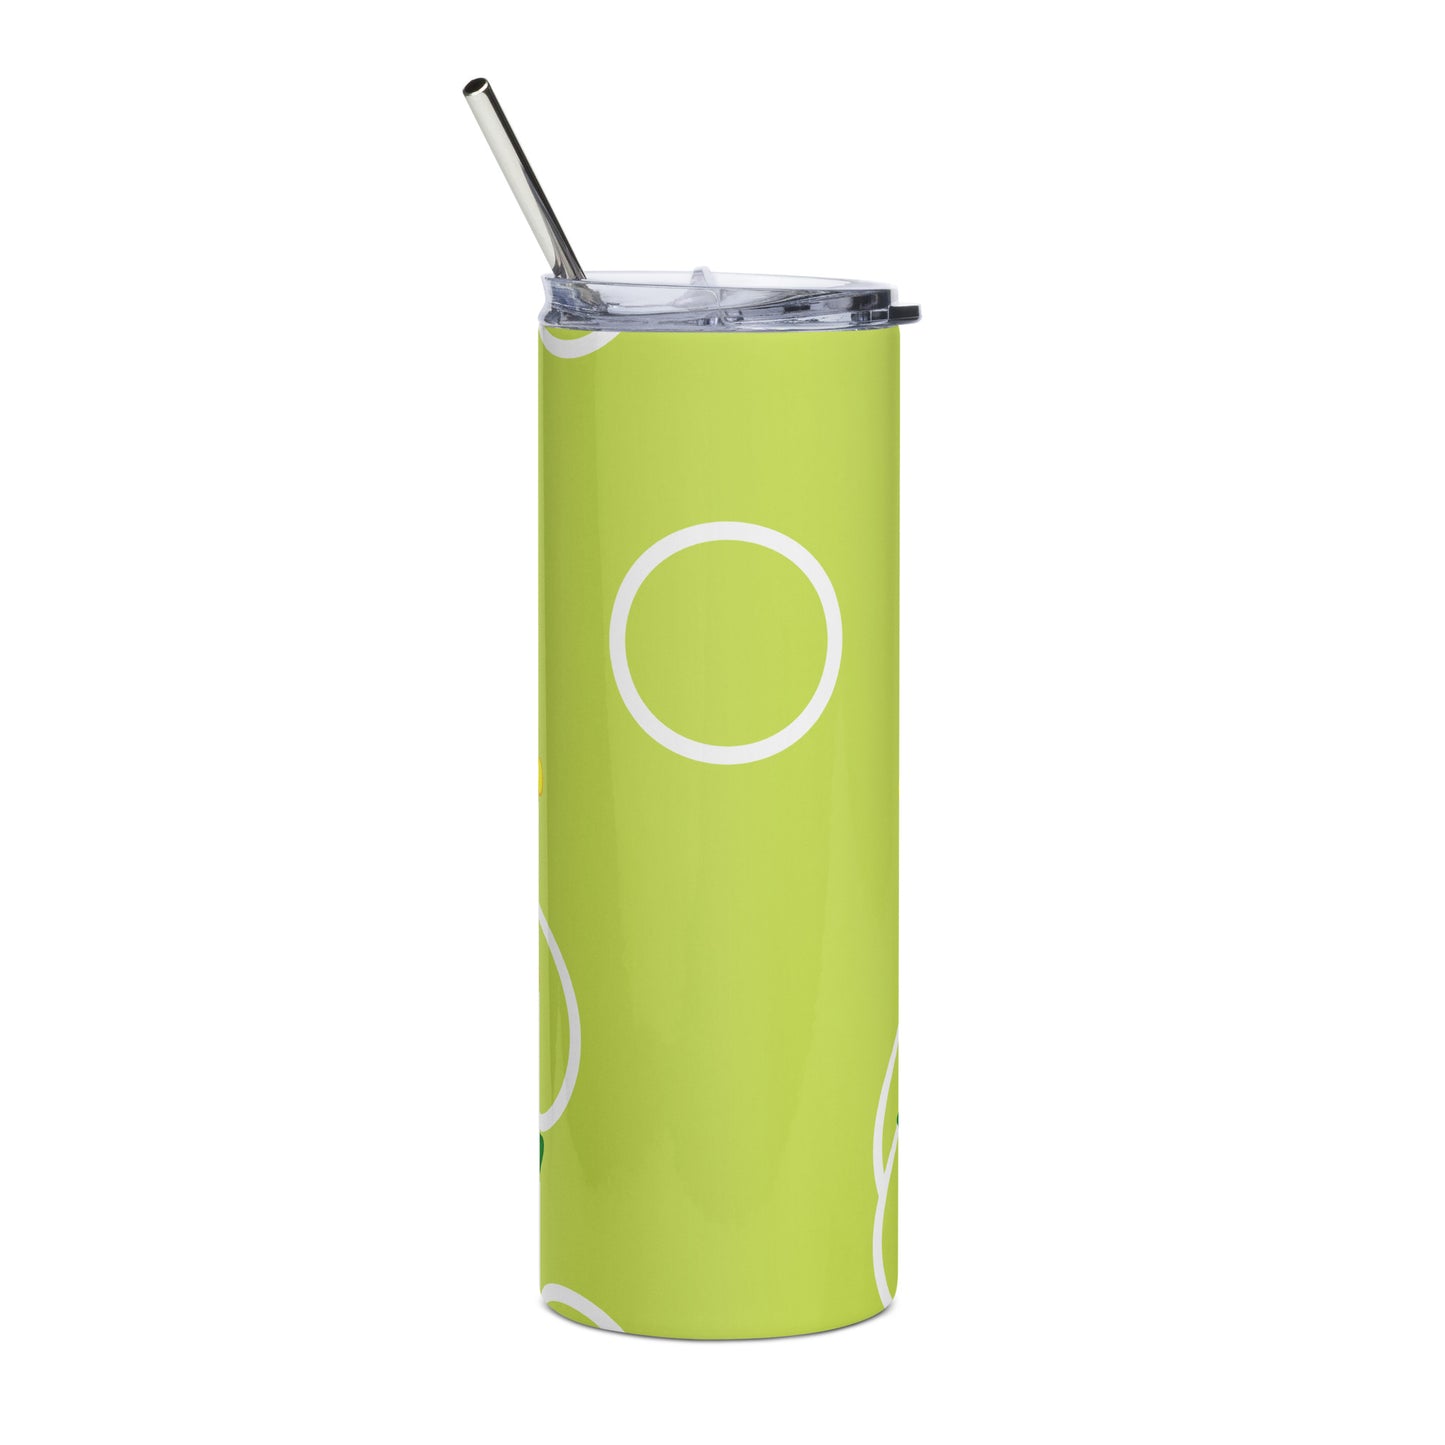 Marie Curie Stainless steel tumbler